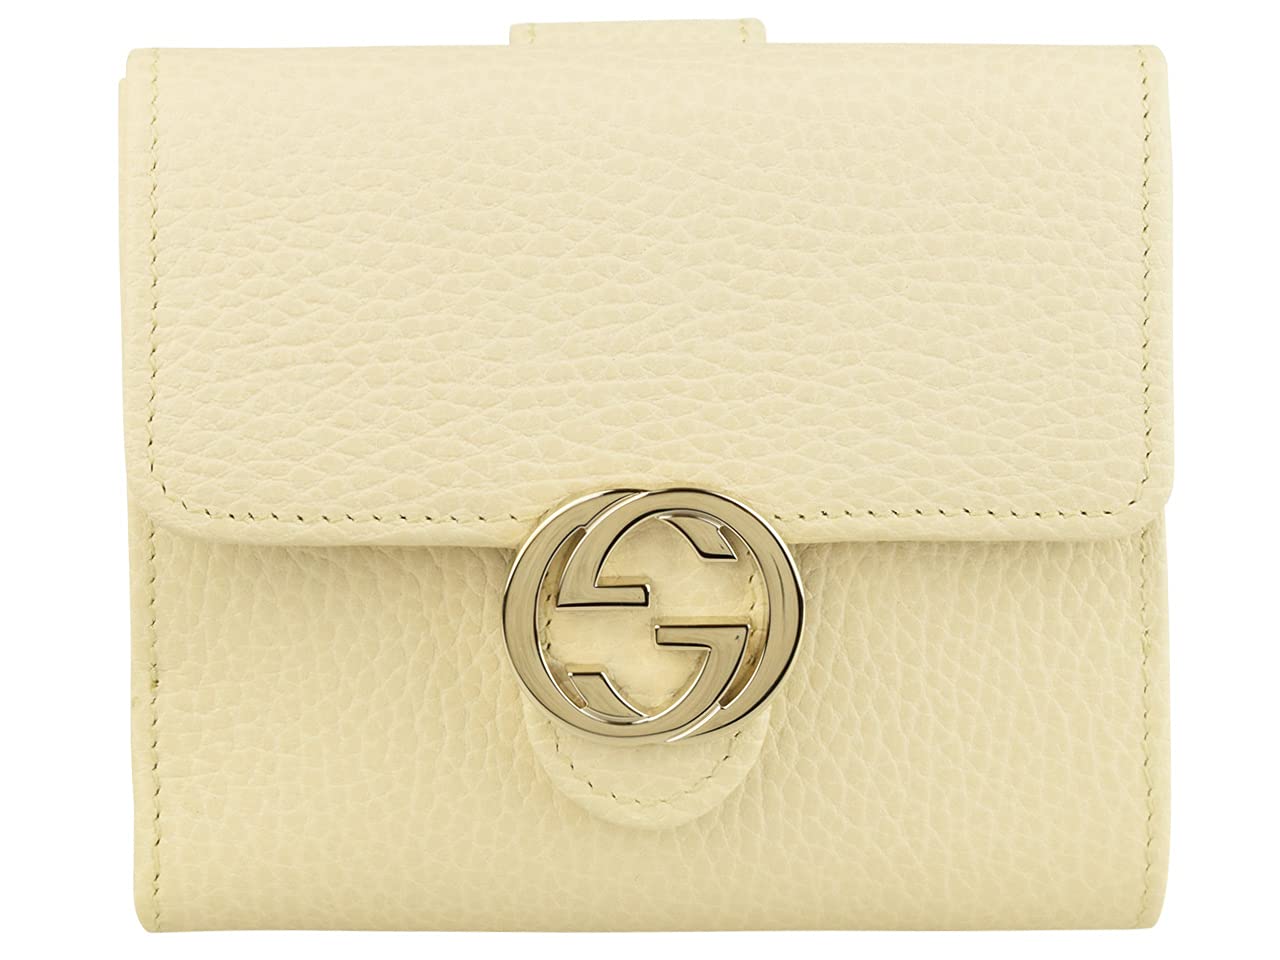 Gucci SOHO 615525 Women's Bi-Fold Wallet, Outlet, Folding Wallet, Leather, [Parallel Import], white (off-white)